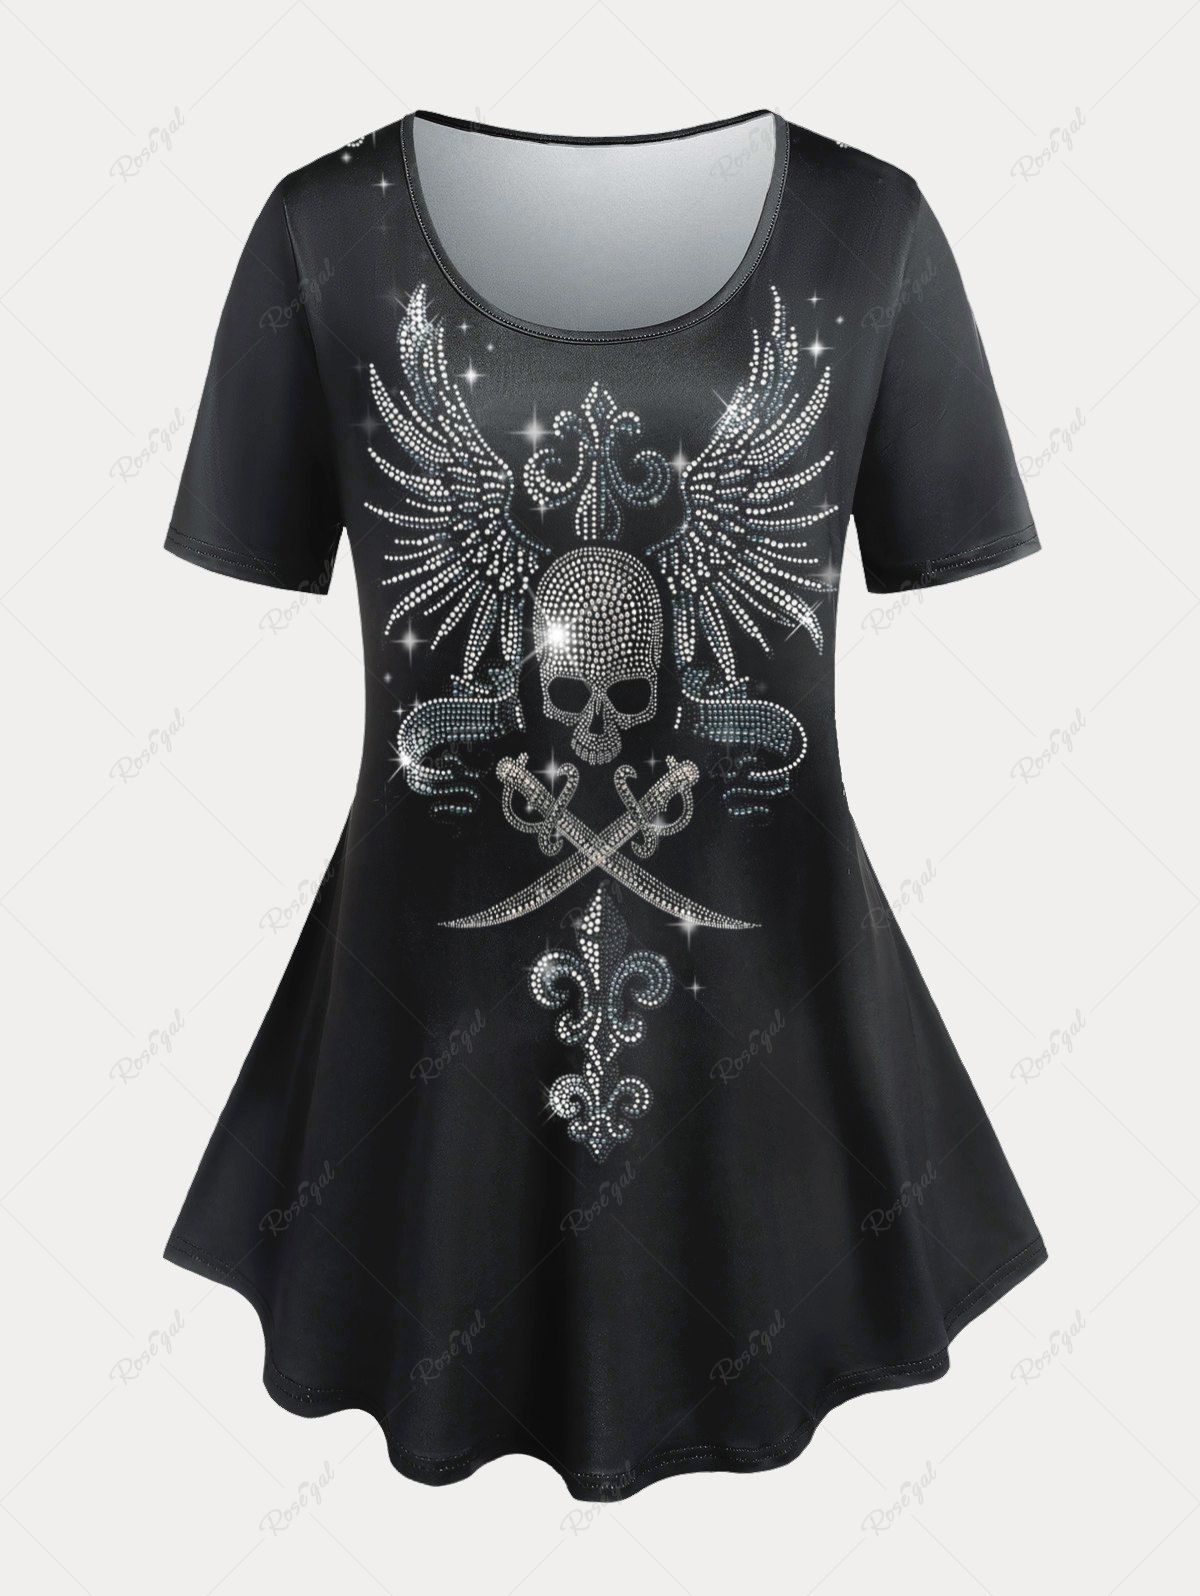 Shop Plus Size & Curve Skull Wings Gothic Short Sleeves Tee  